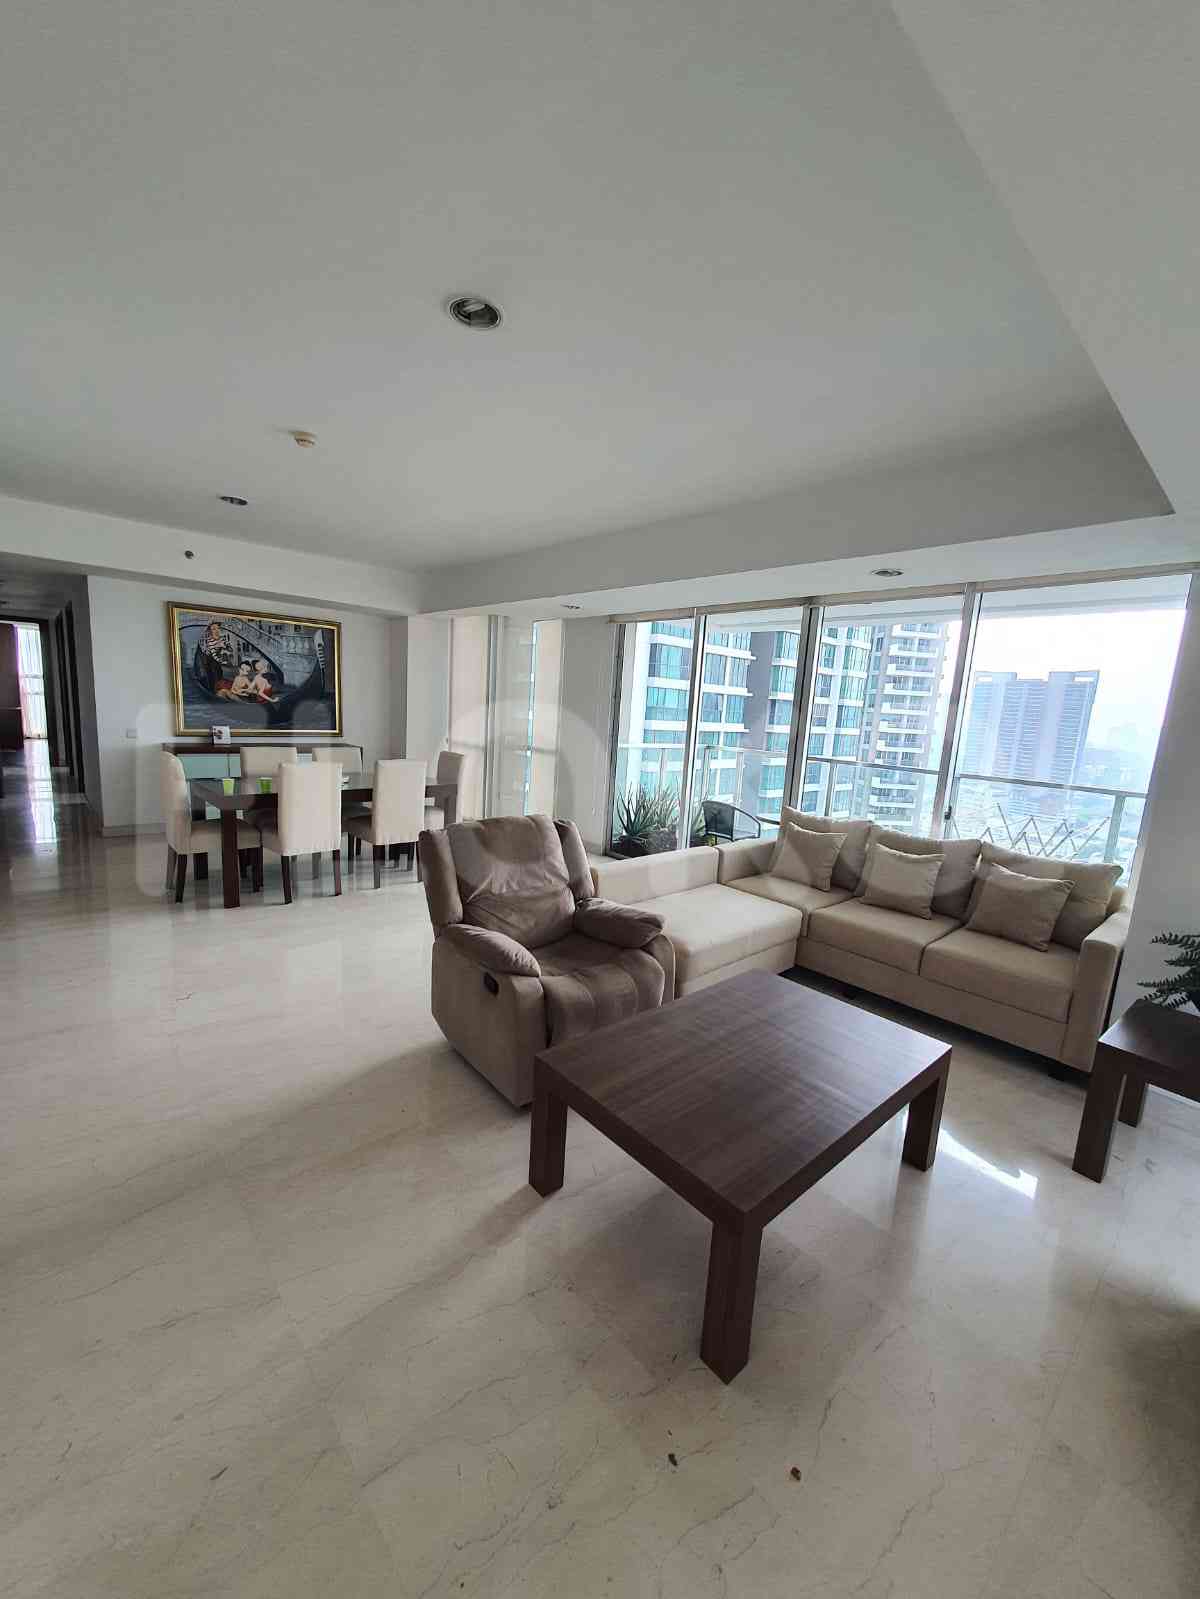 3 Bedroom on 15th Floor for Rent in Kemang Village Residence - fked84 2